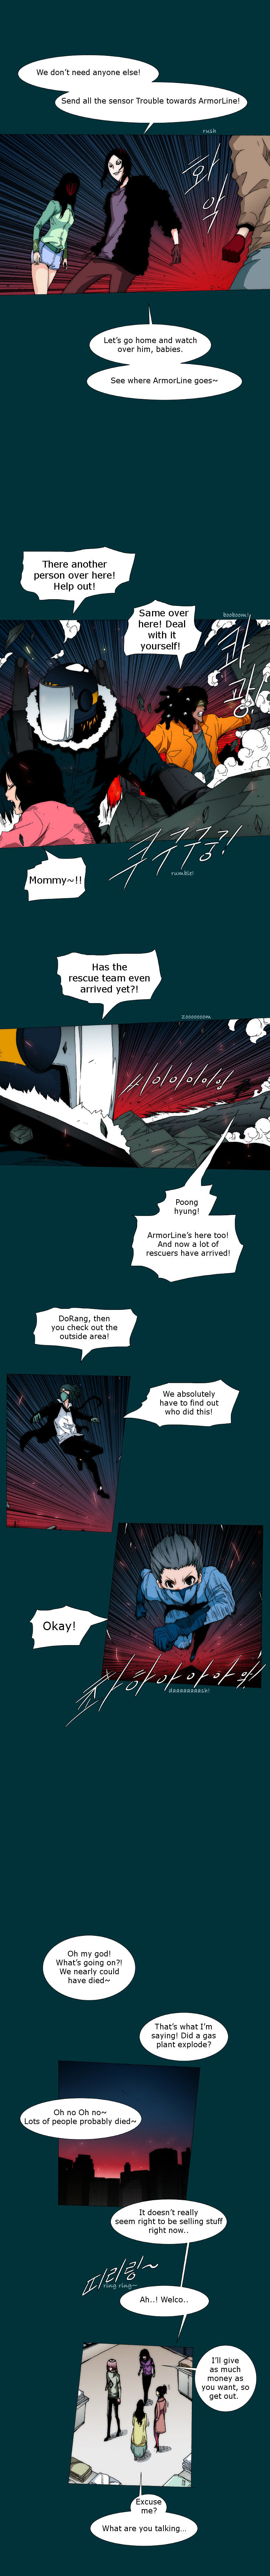 Trace 2.0 - Page 3